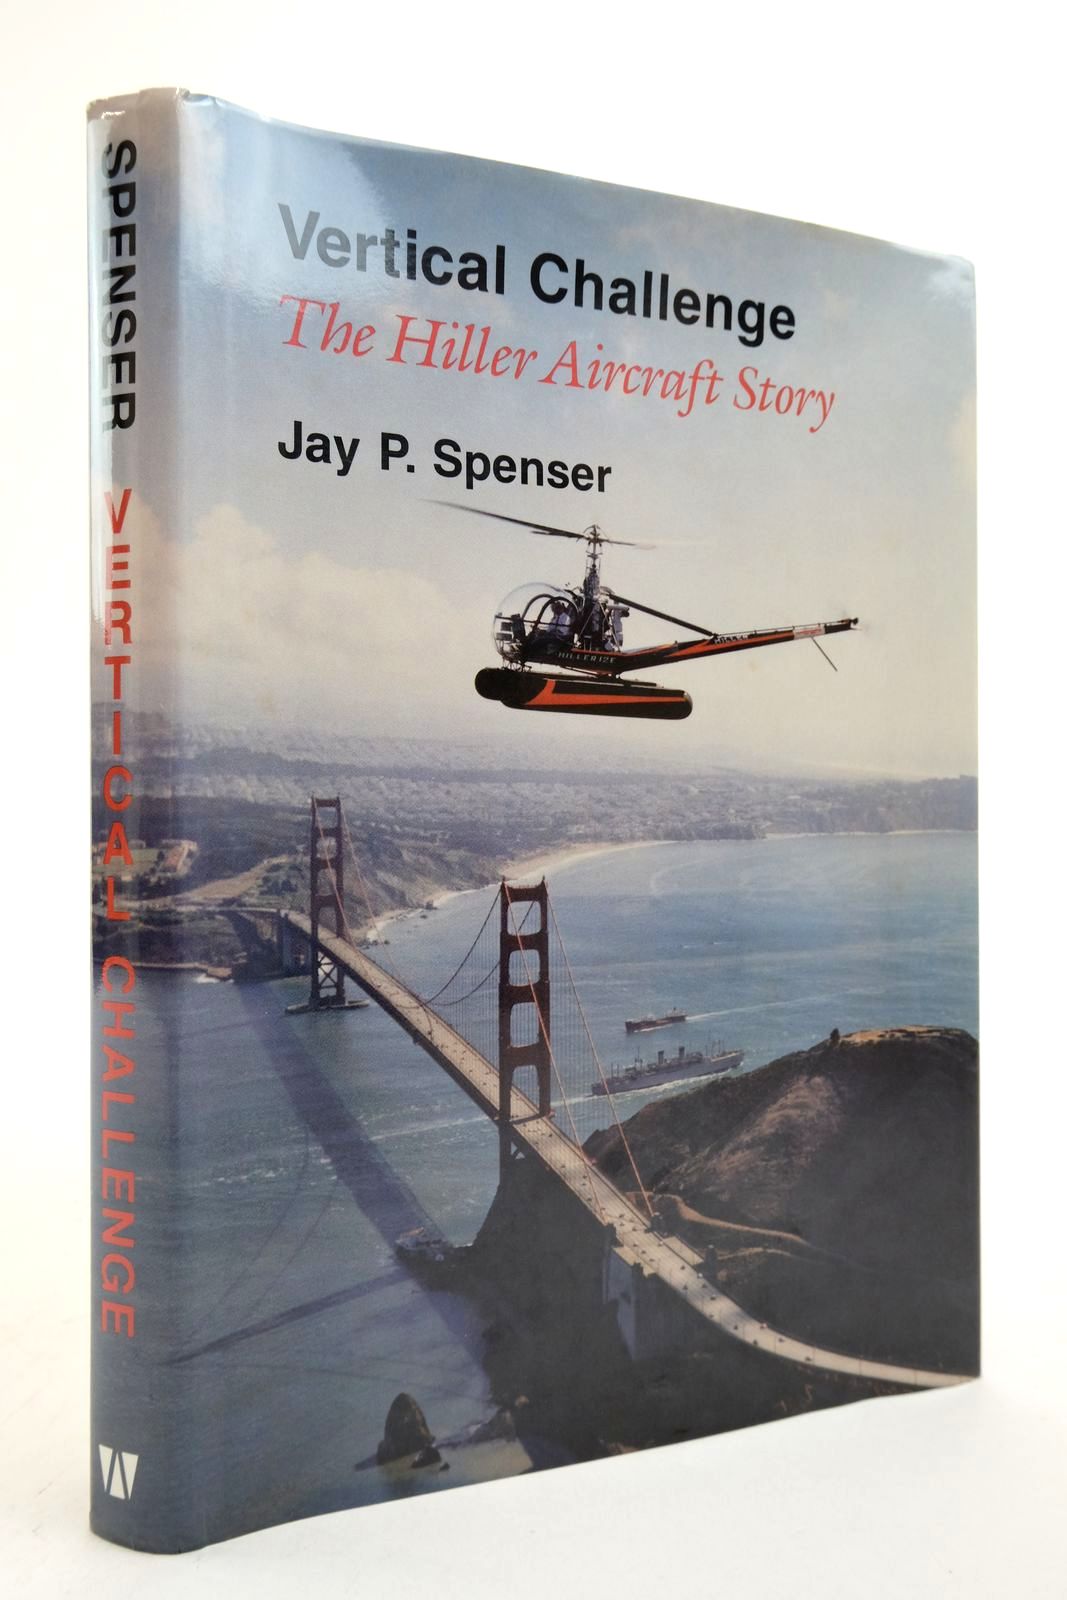 Photo of VERTICAL CHALLENGE: THE HILLER AIRCRAFT STORY written by Spenser, Jay P. published by University of Washington Press (STOCK CODE: 2139208)  for sale by Stella & Rose's Books